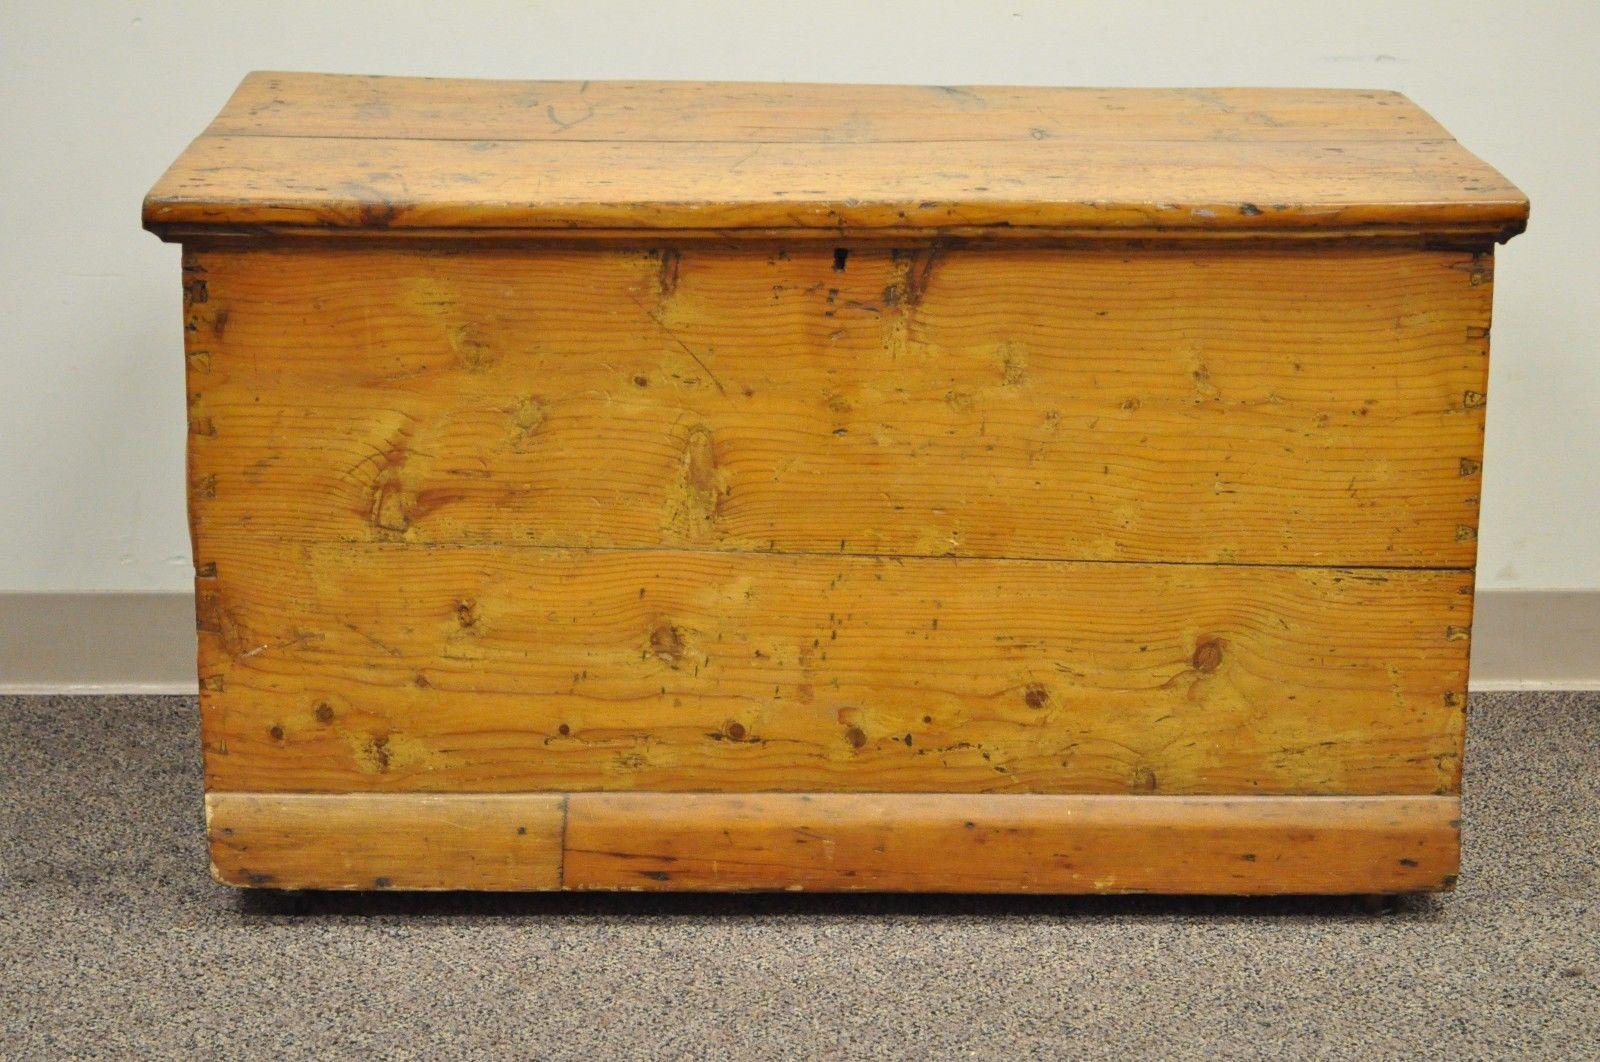 Antique solid pine hand dovetailed American primitive blanket chest. Item details hand dovetailed joinery, solid wood construction, exposed joint construction to wood plank top, blue painted interior, great original patina, American made, circa